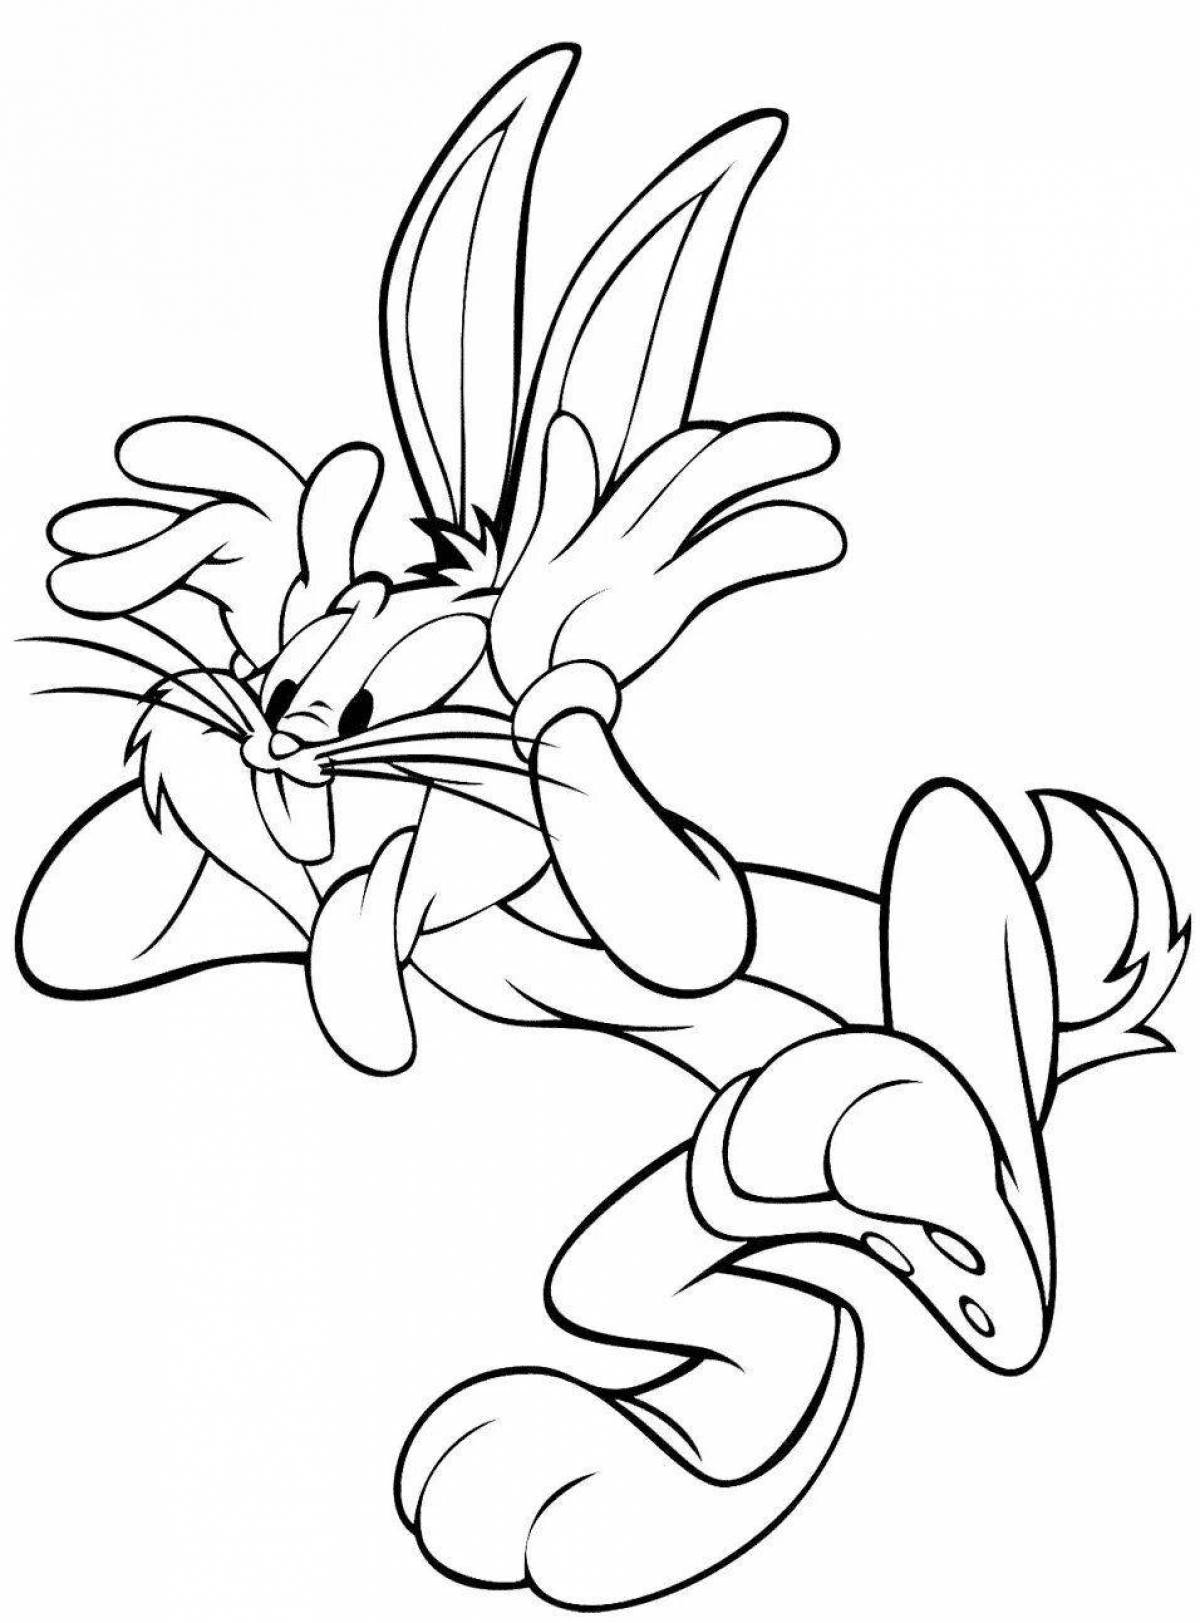 Wiggly tiny bunny coloring page